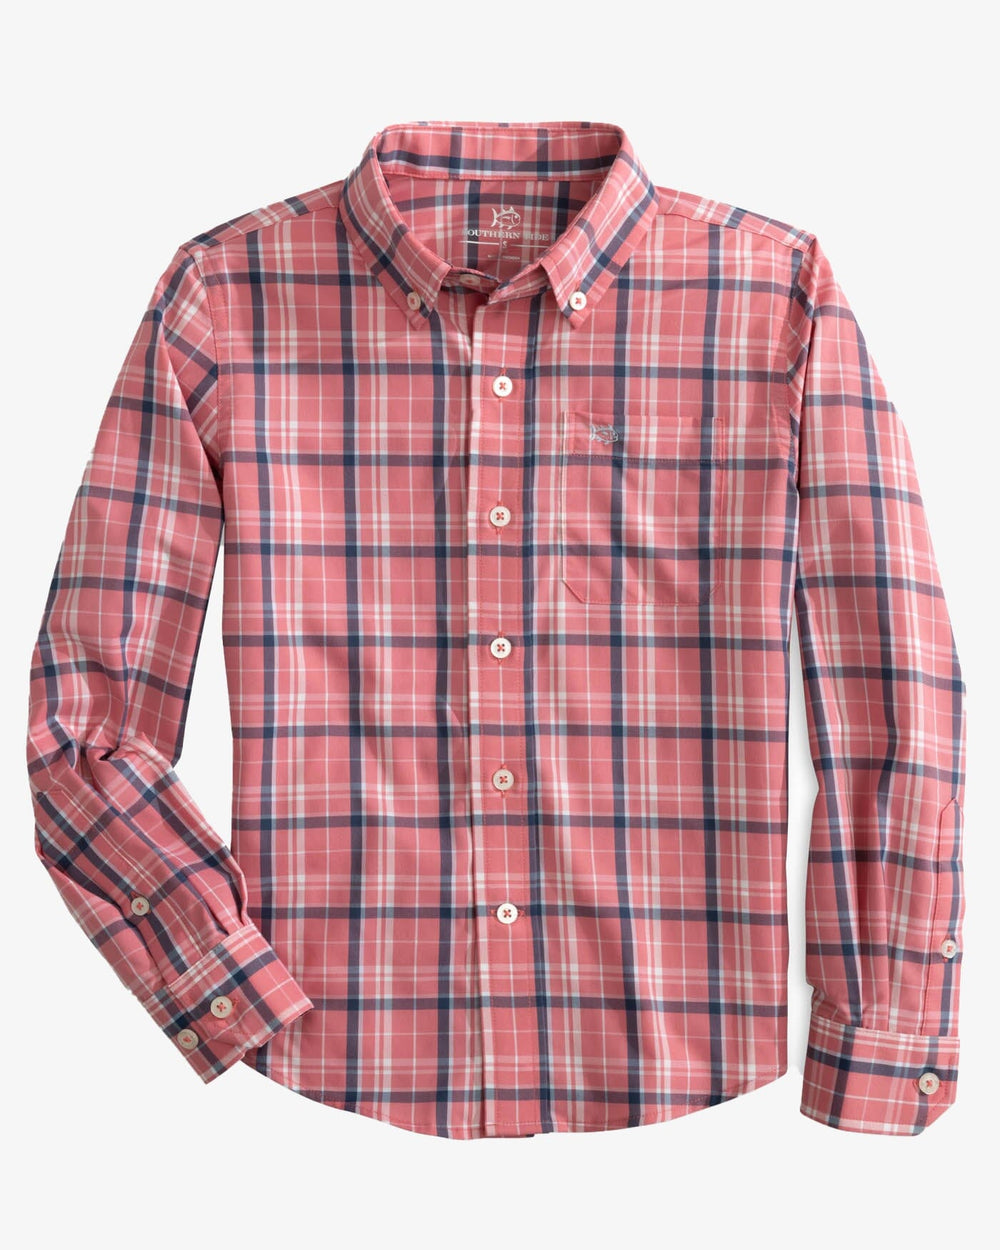 The front view of the Southern Tide Boys Asheland Plaid Intercoastal Long Sleeve Sportshirt by Southern Tide - Dusty Coral